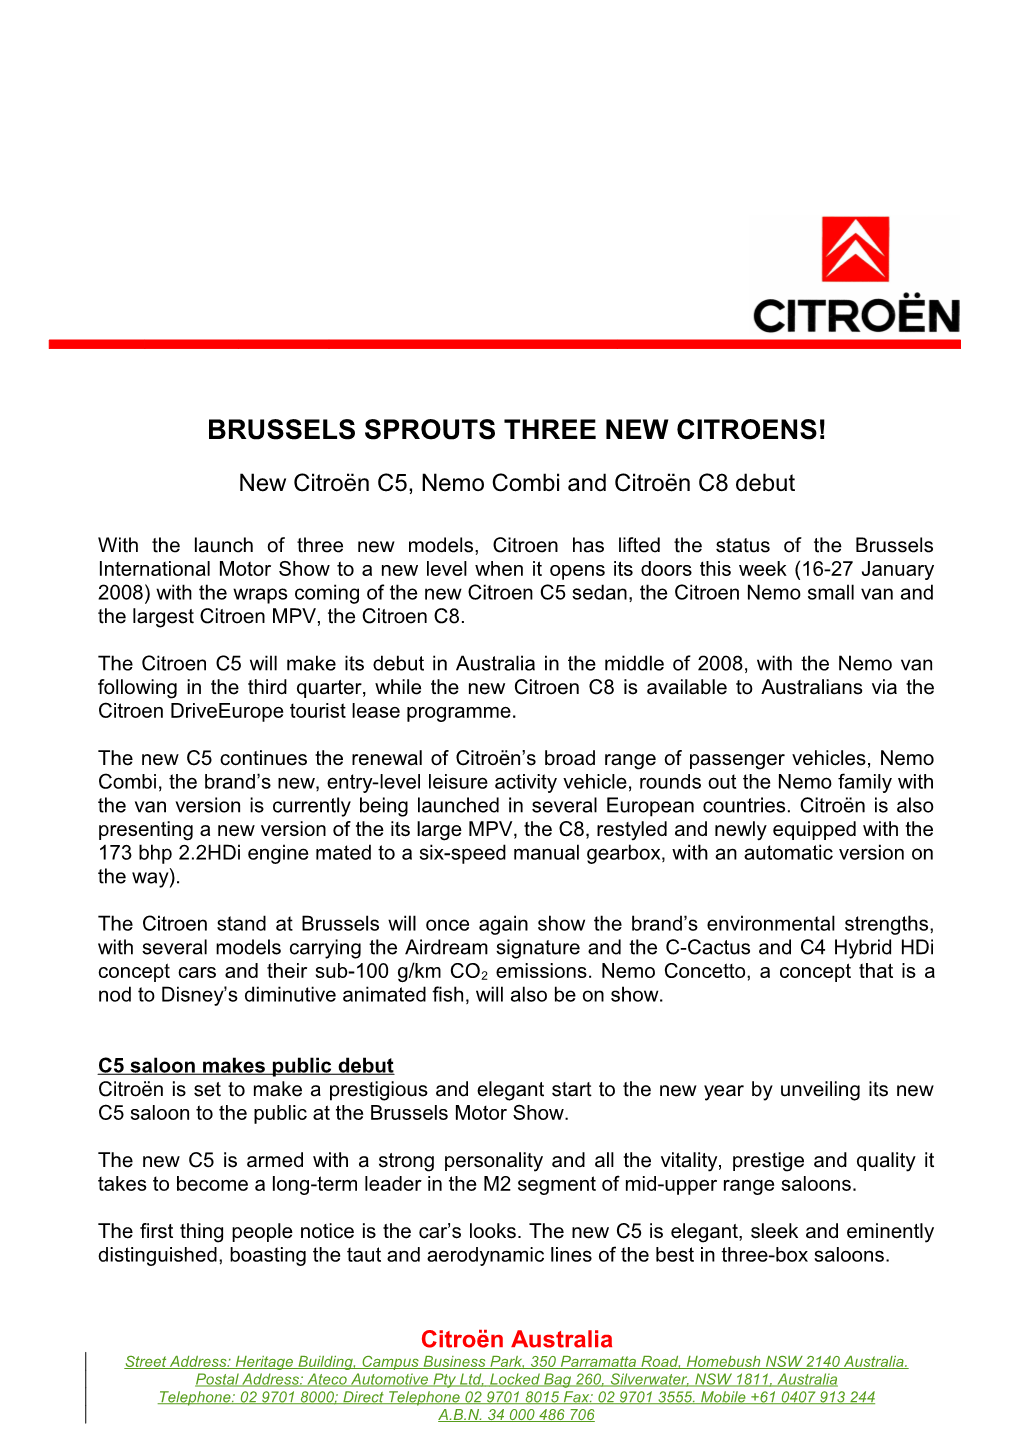 Brussels Sprouts Three New Citroens!